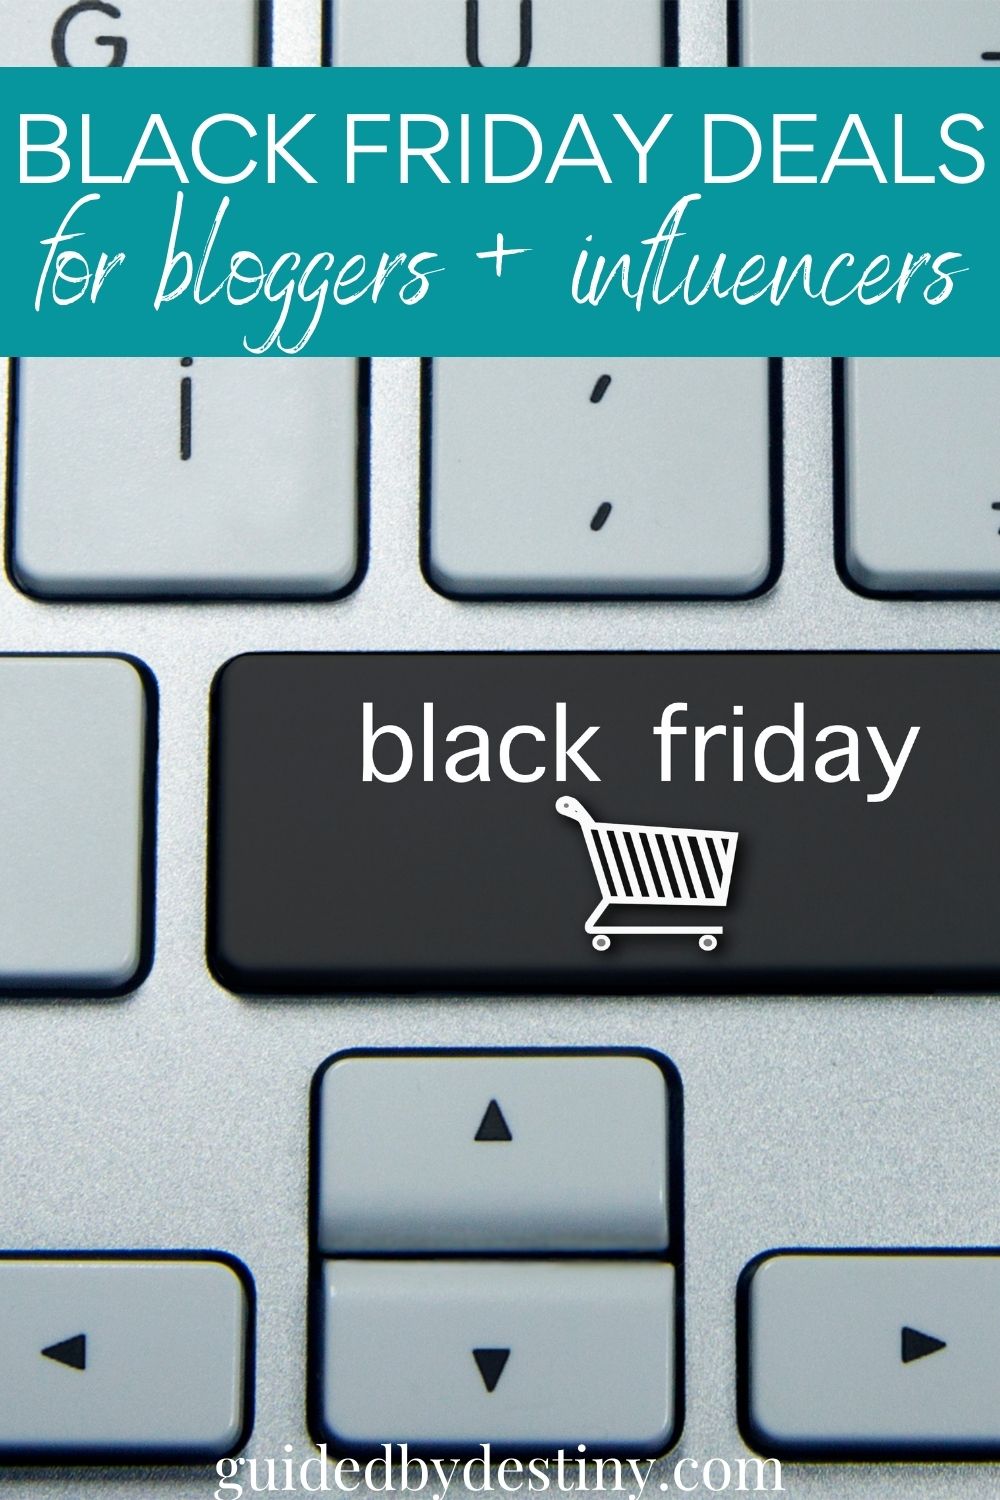 Black Friday Deals for bloggers and influencers